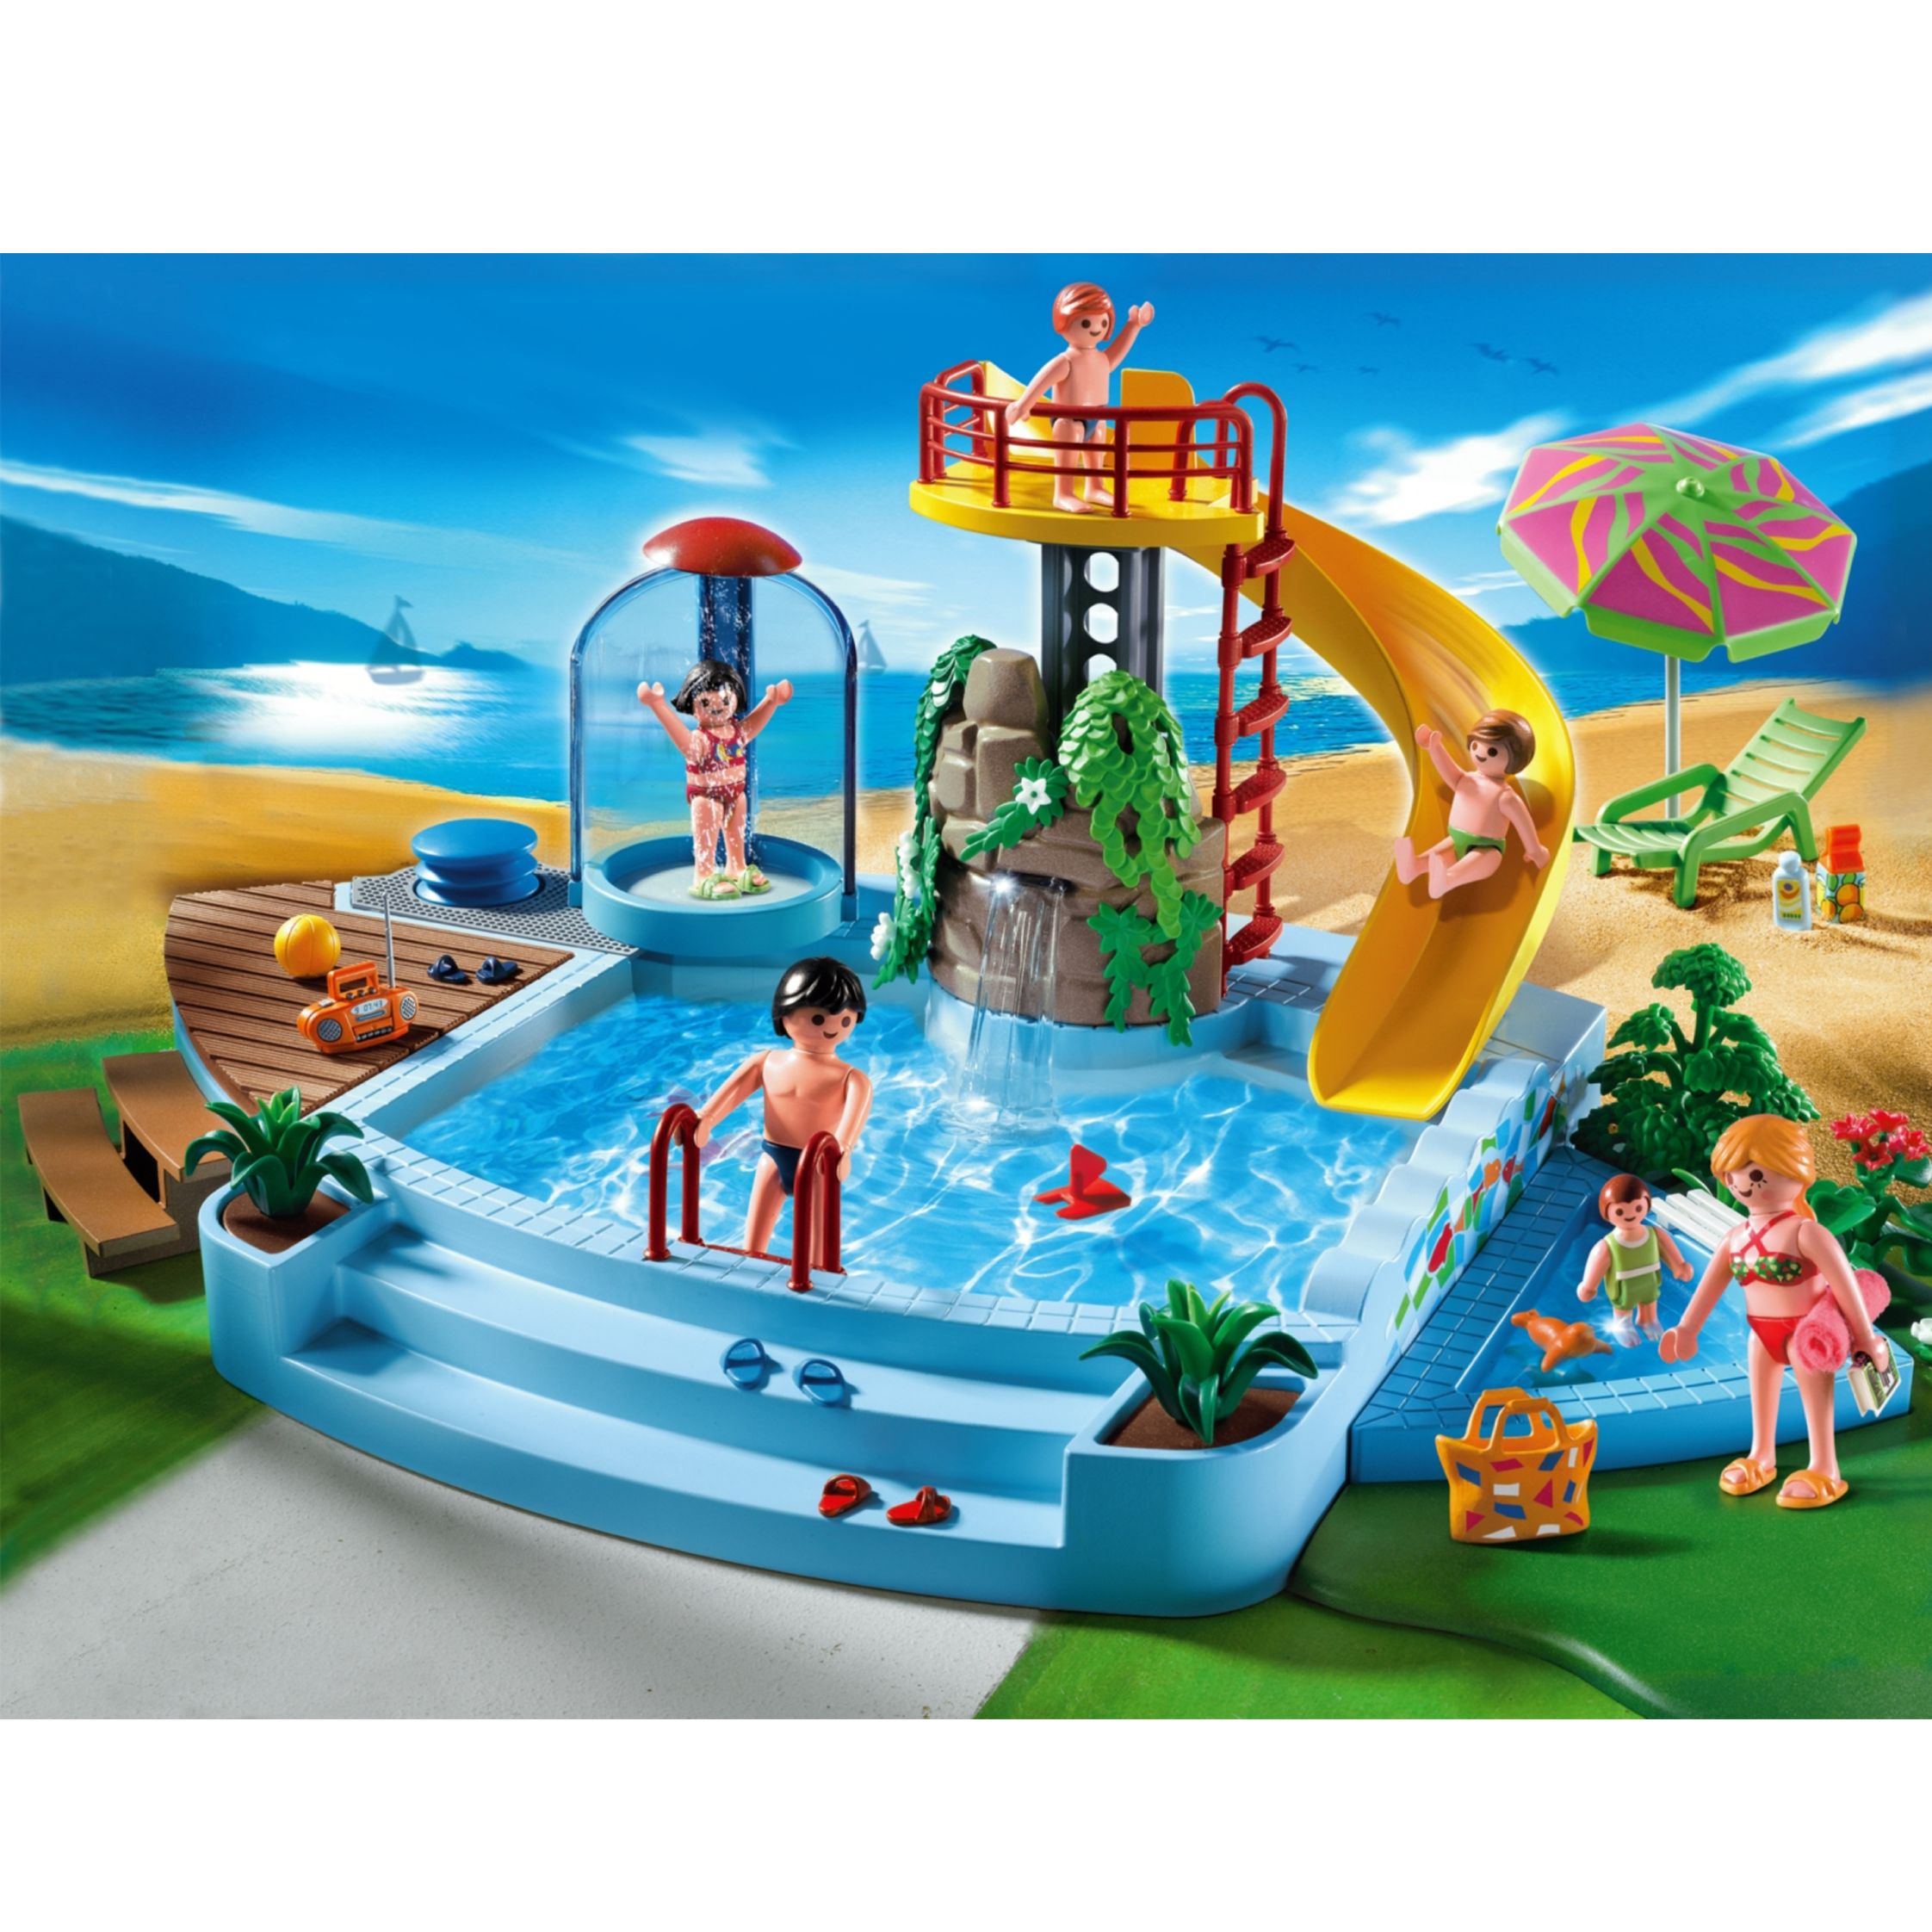 Pool Party - 70987